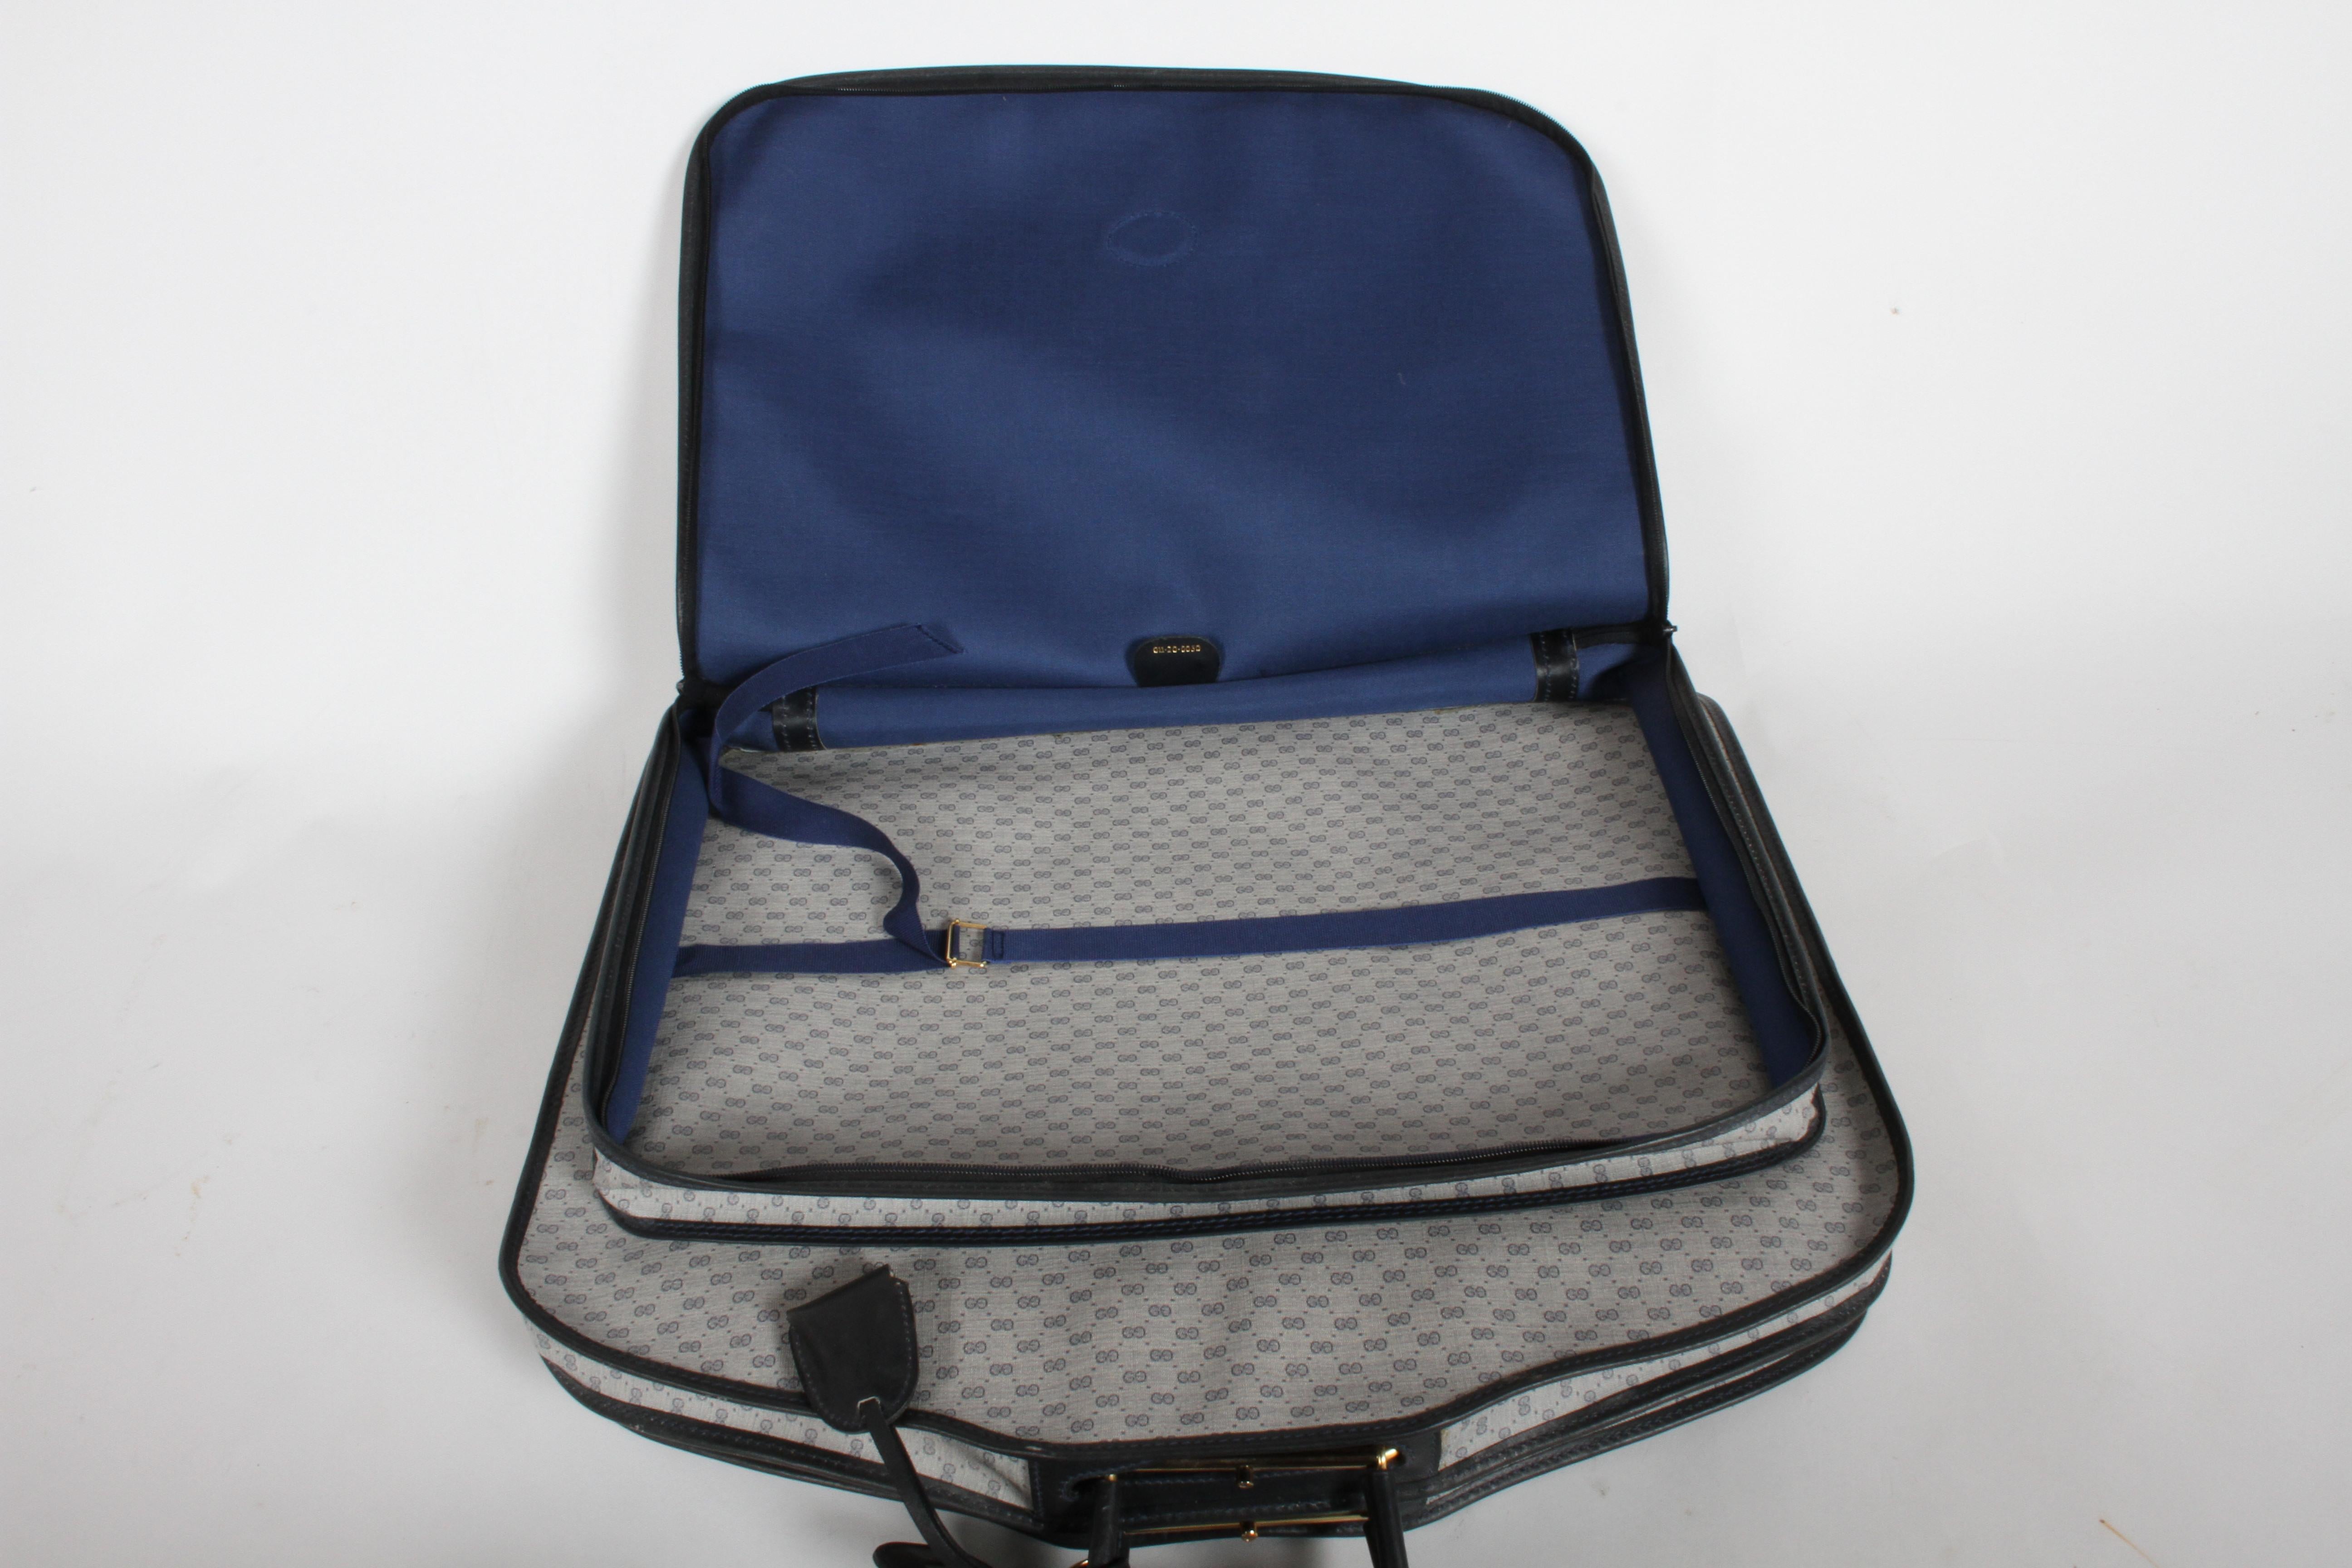 Vintage 1980s Gucci Luggage Carry On Garment Bag with Blue GG logos Unused - NOS For Sale 6